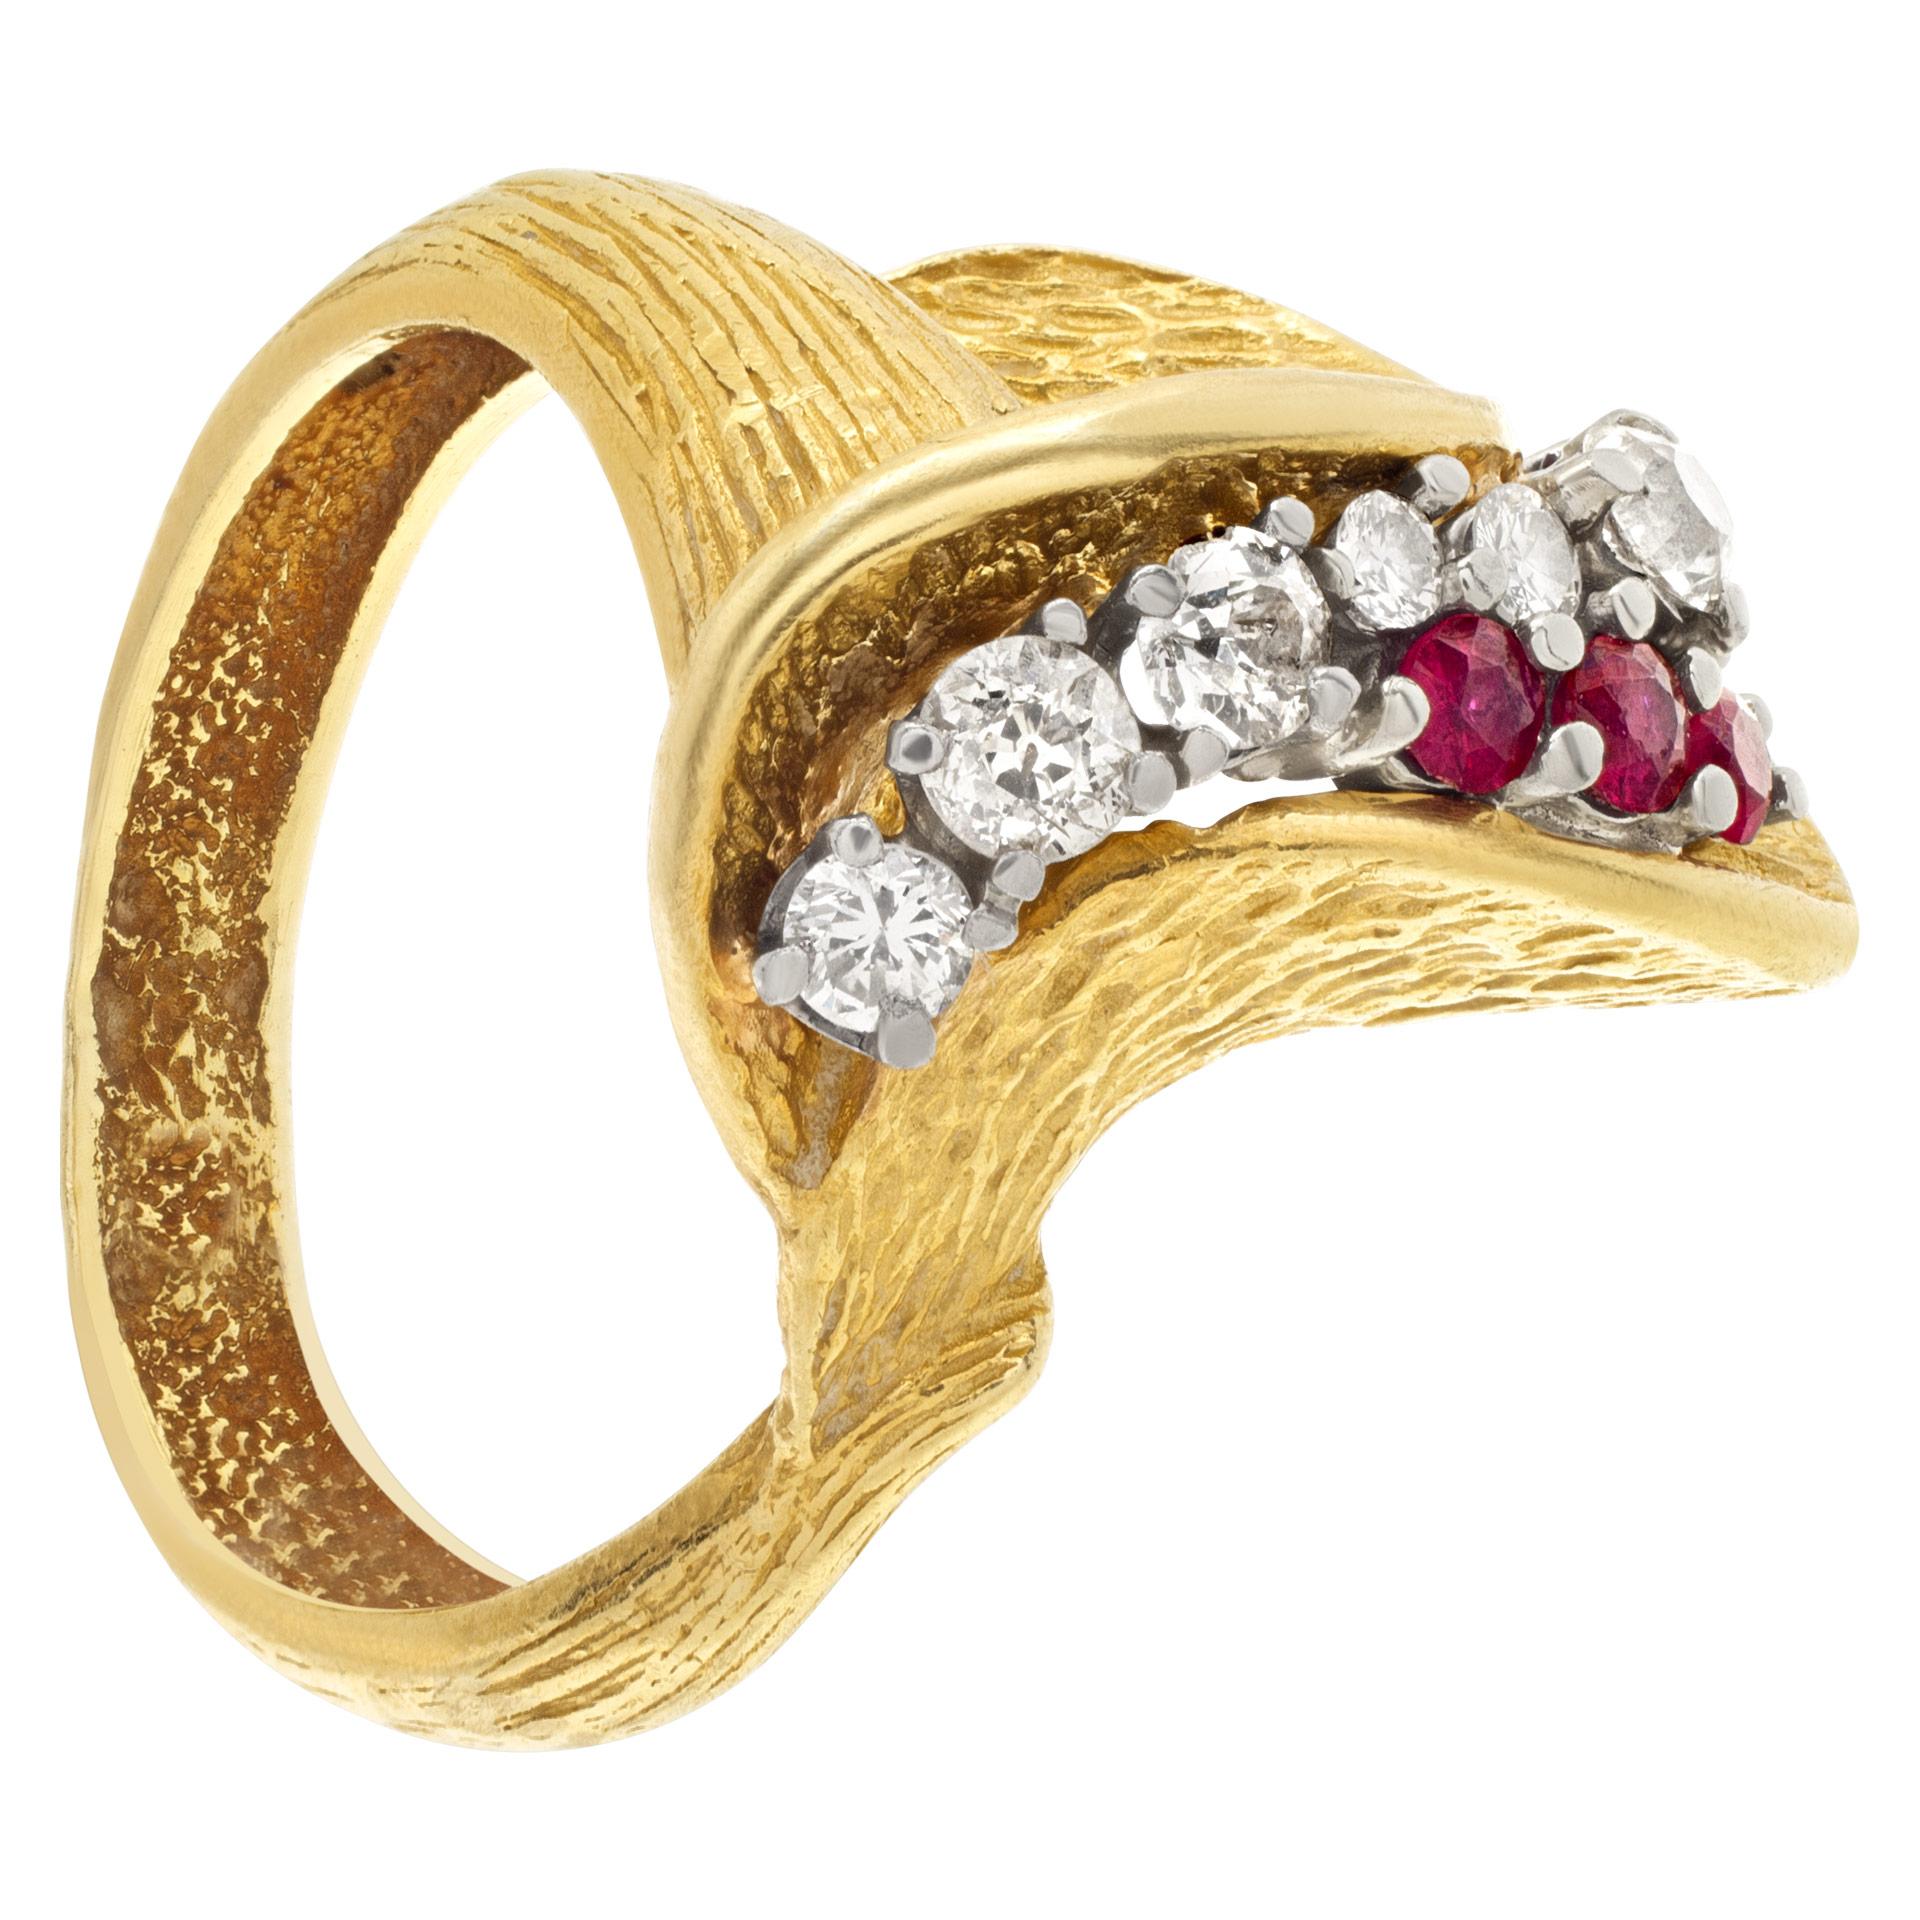 Tulip Design Ruby & Diamond Ring in 18k Yellow Gold In Excellent Condition For Sale In Surfside, FL